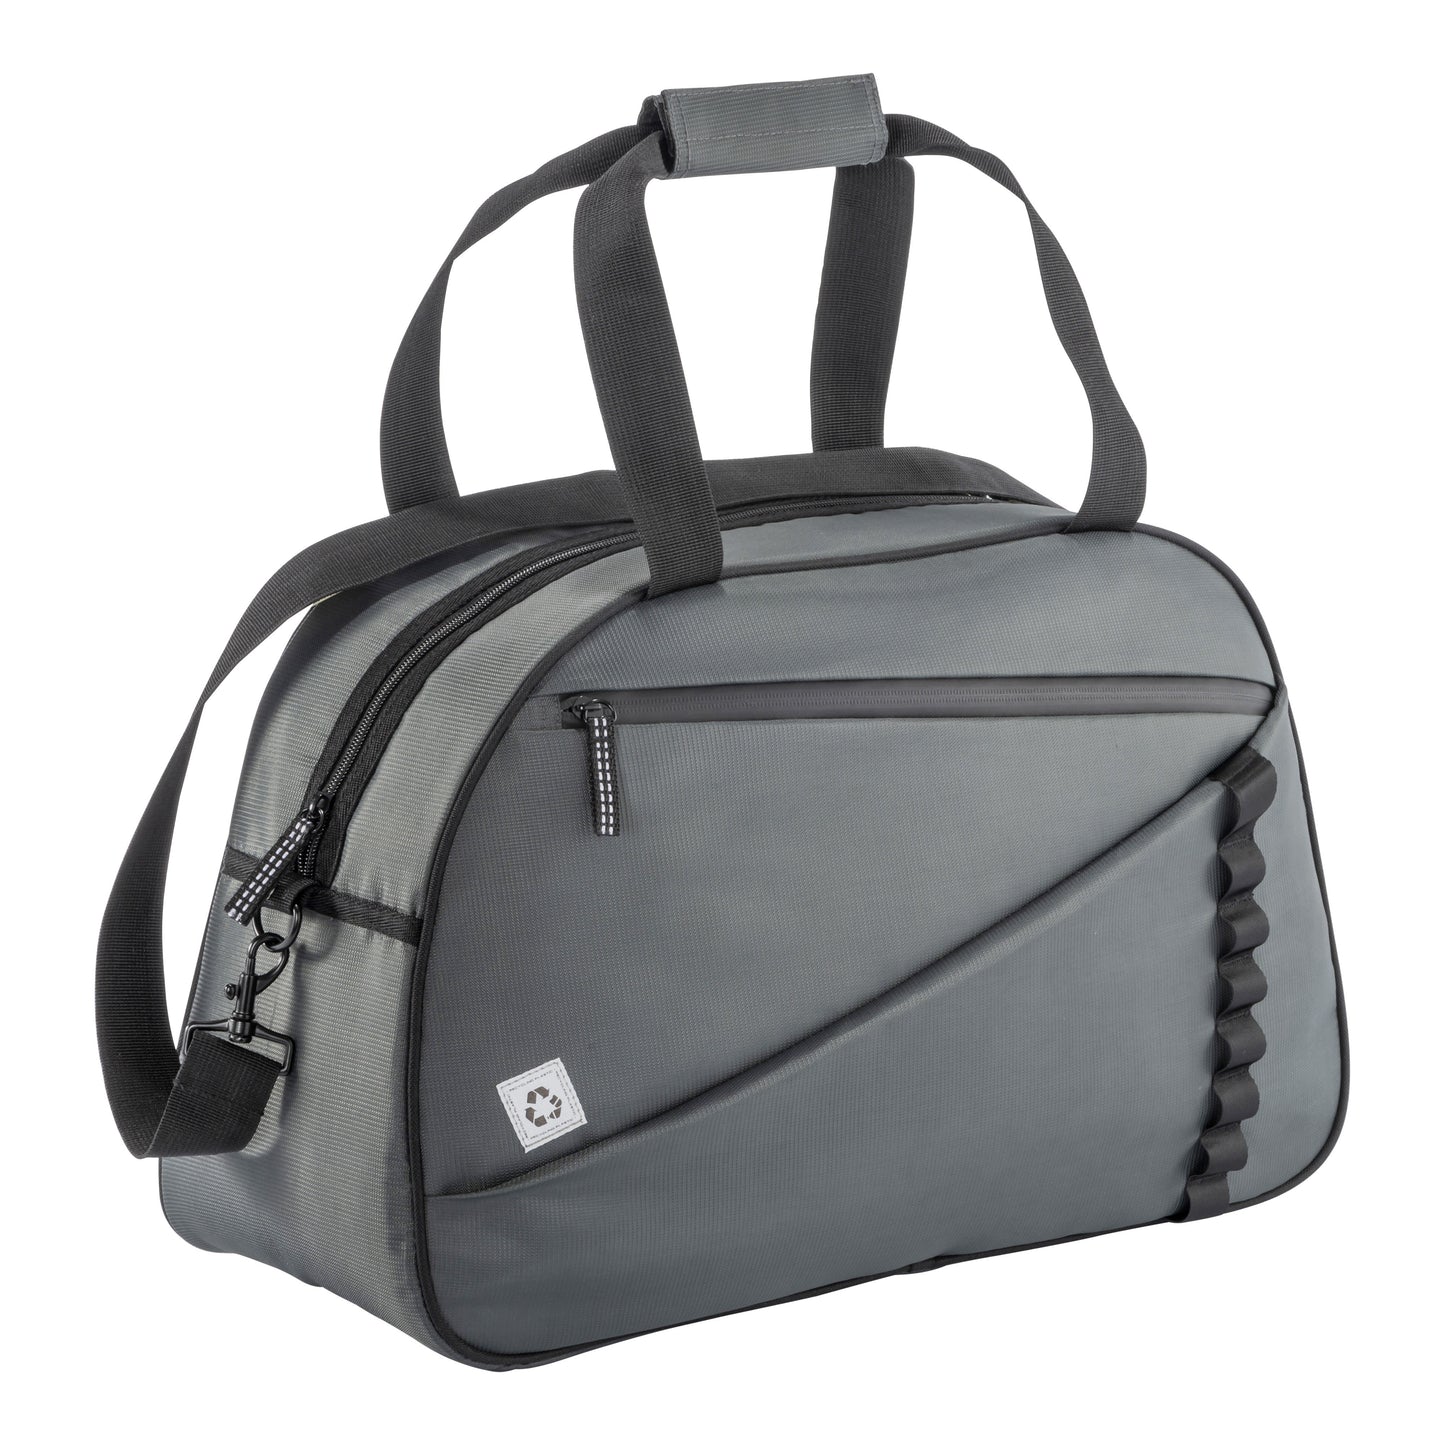 Padded duffle bag in recycled pet